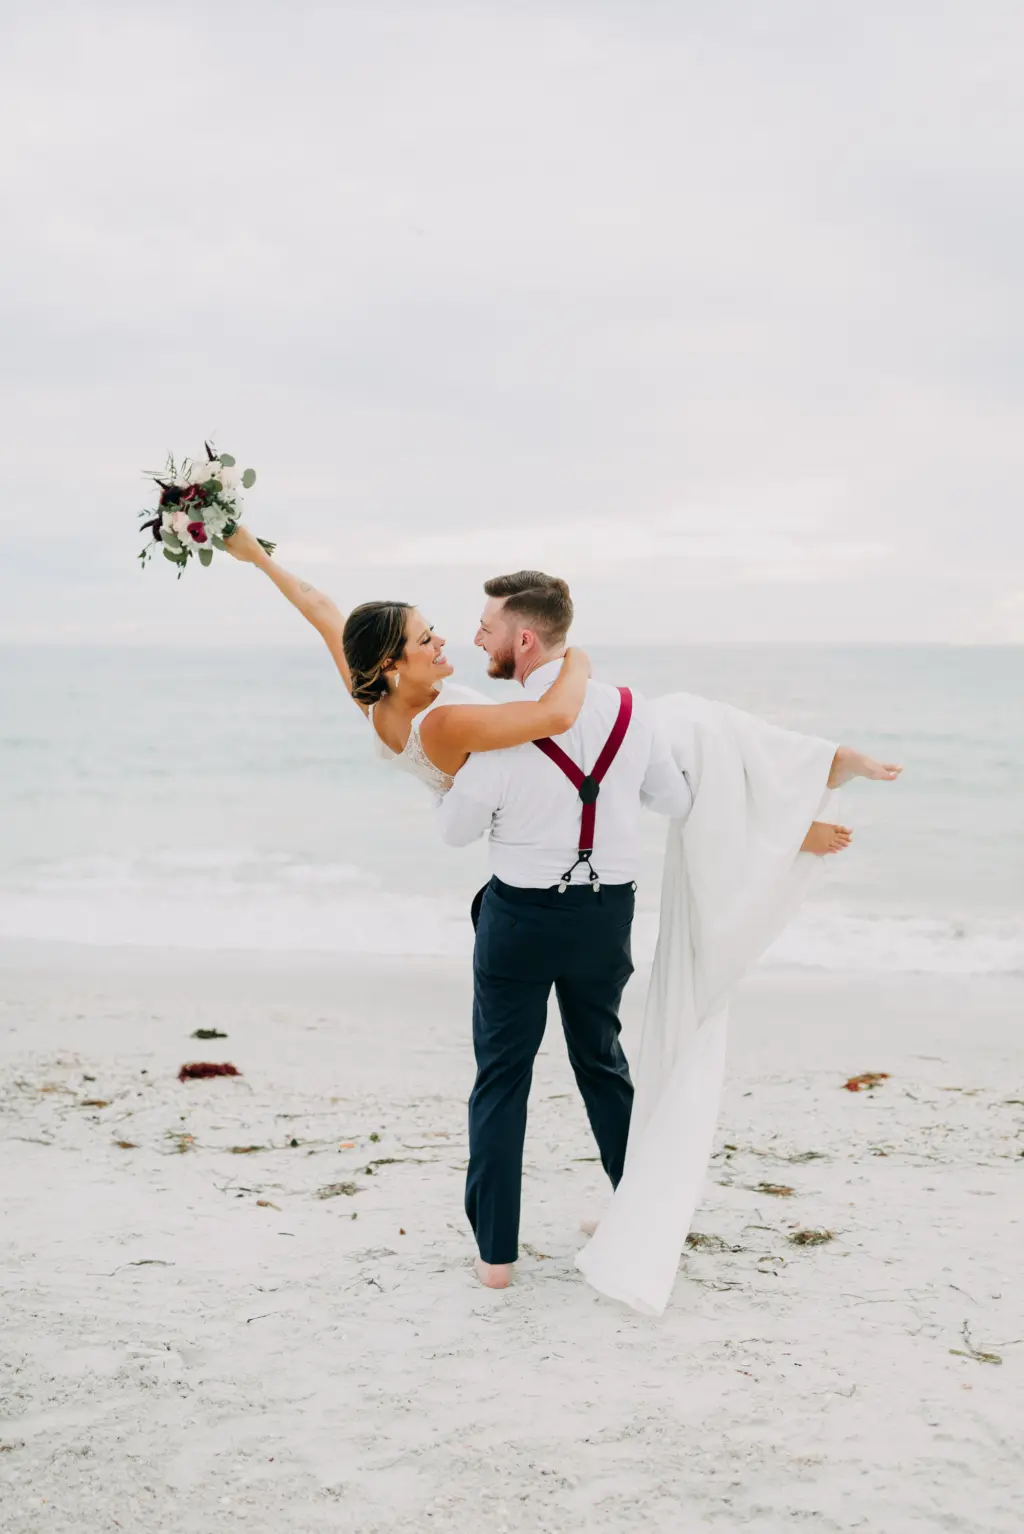 Bride and Groom Fall Elopement Beach Wedding Portrait | Tampa Bay Photographer Amber McWhorter Photography | Planner Elope Tampa Bay